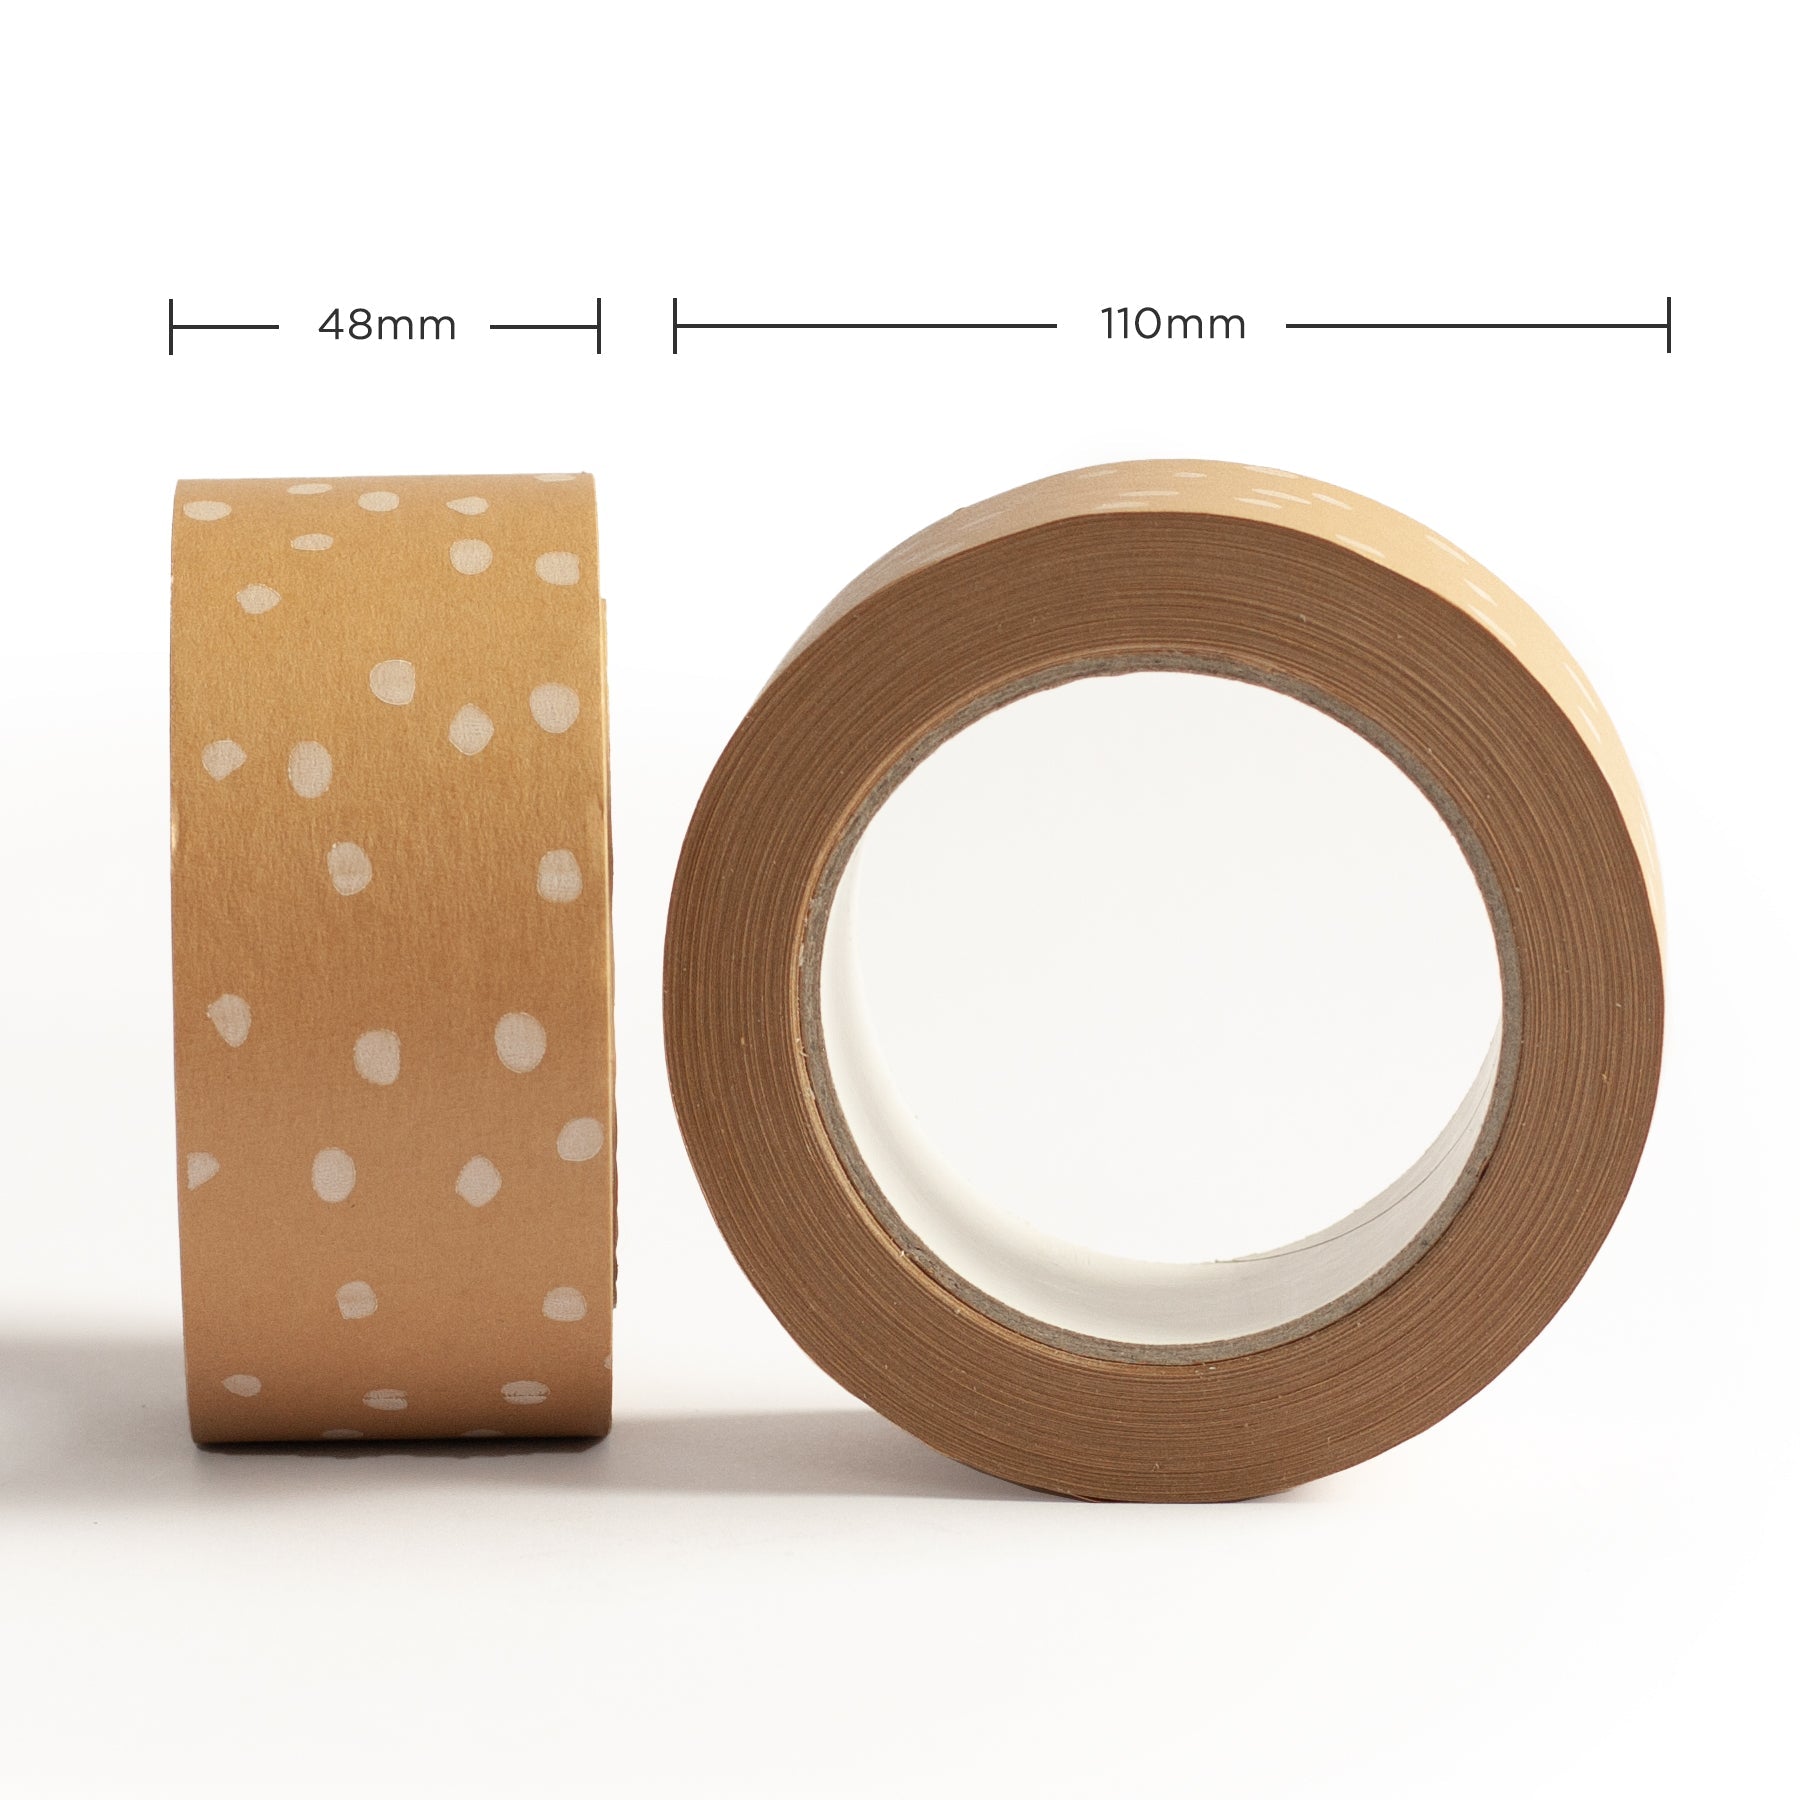 Recyclable Eco Tape, Polka Dot Paper Packaging Tape, Brown Tape With White  Spotty Design, Self Adhesive Packing Tape Made in UK 